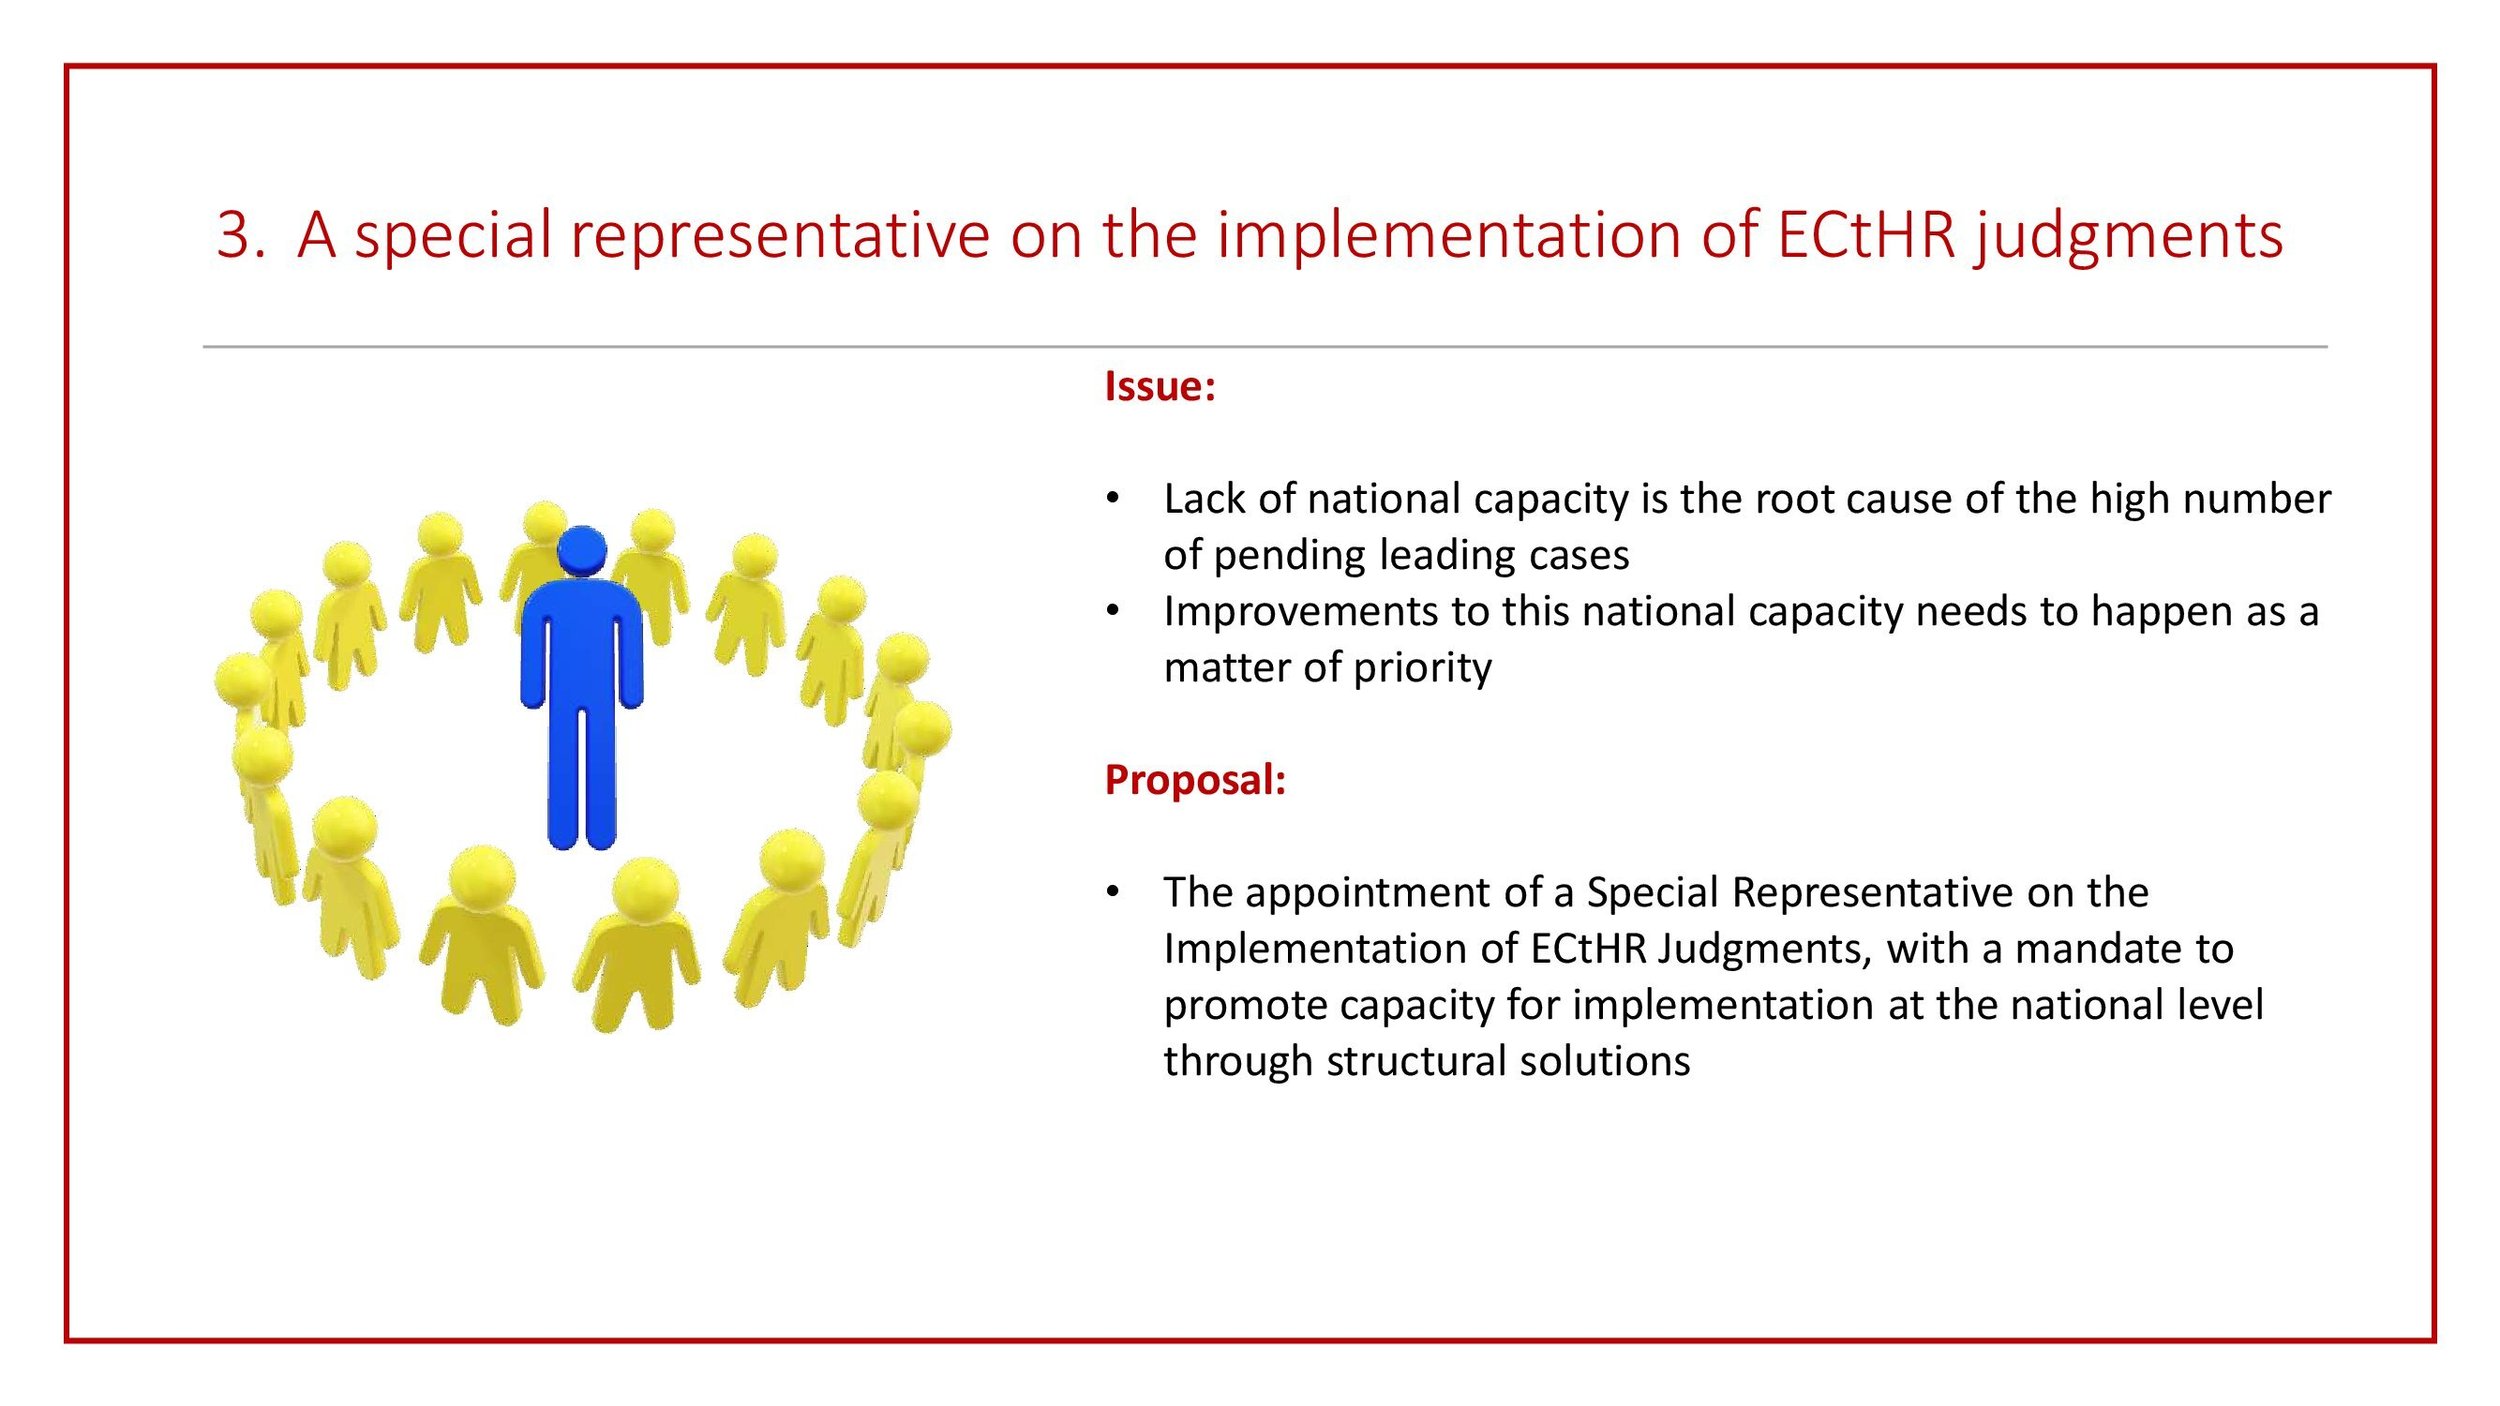 2022_06_The activities of the Council of Europe relating to the implementation of ECtHR judgments_updated_00009.jpg